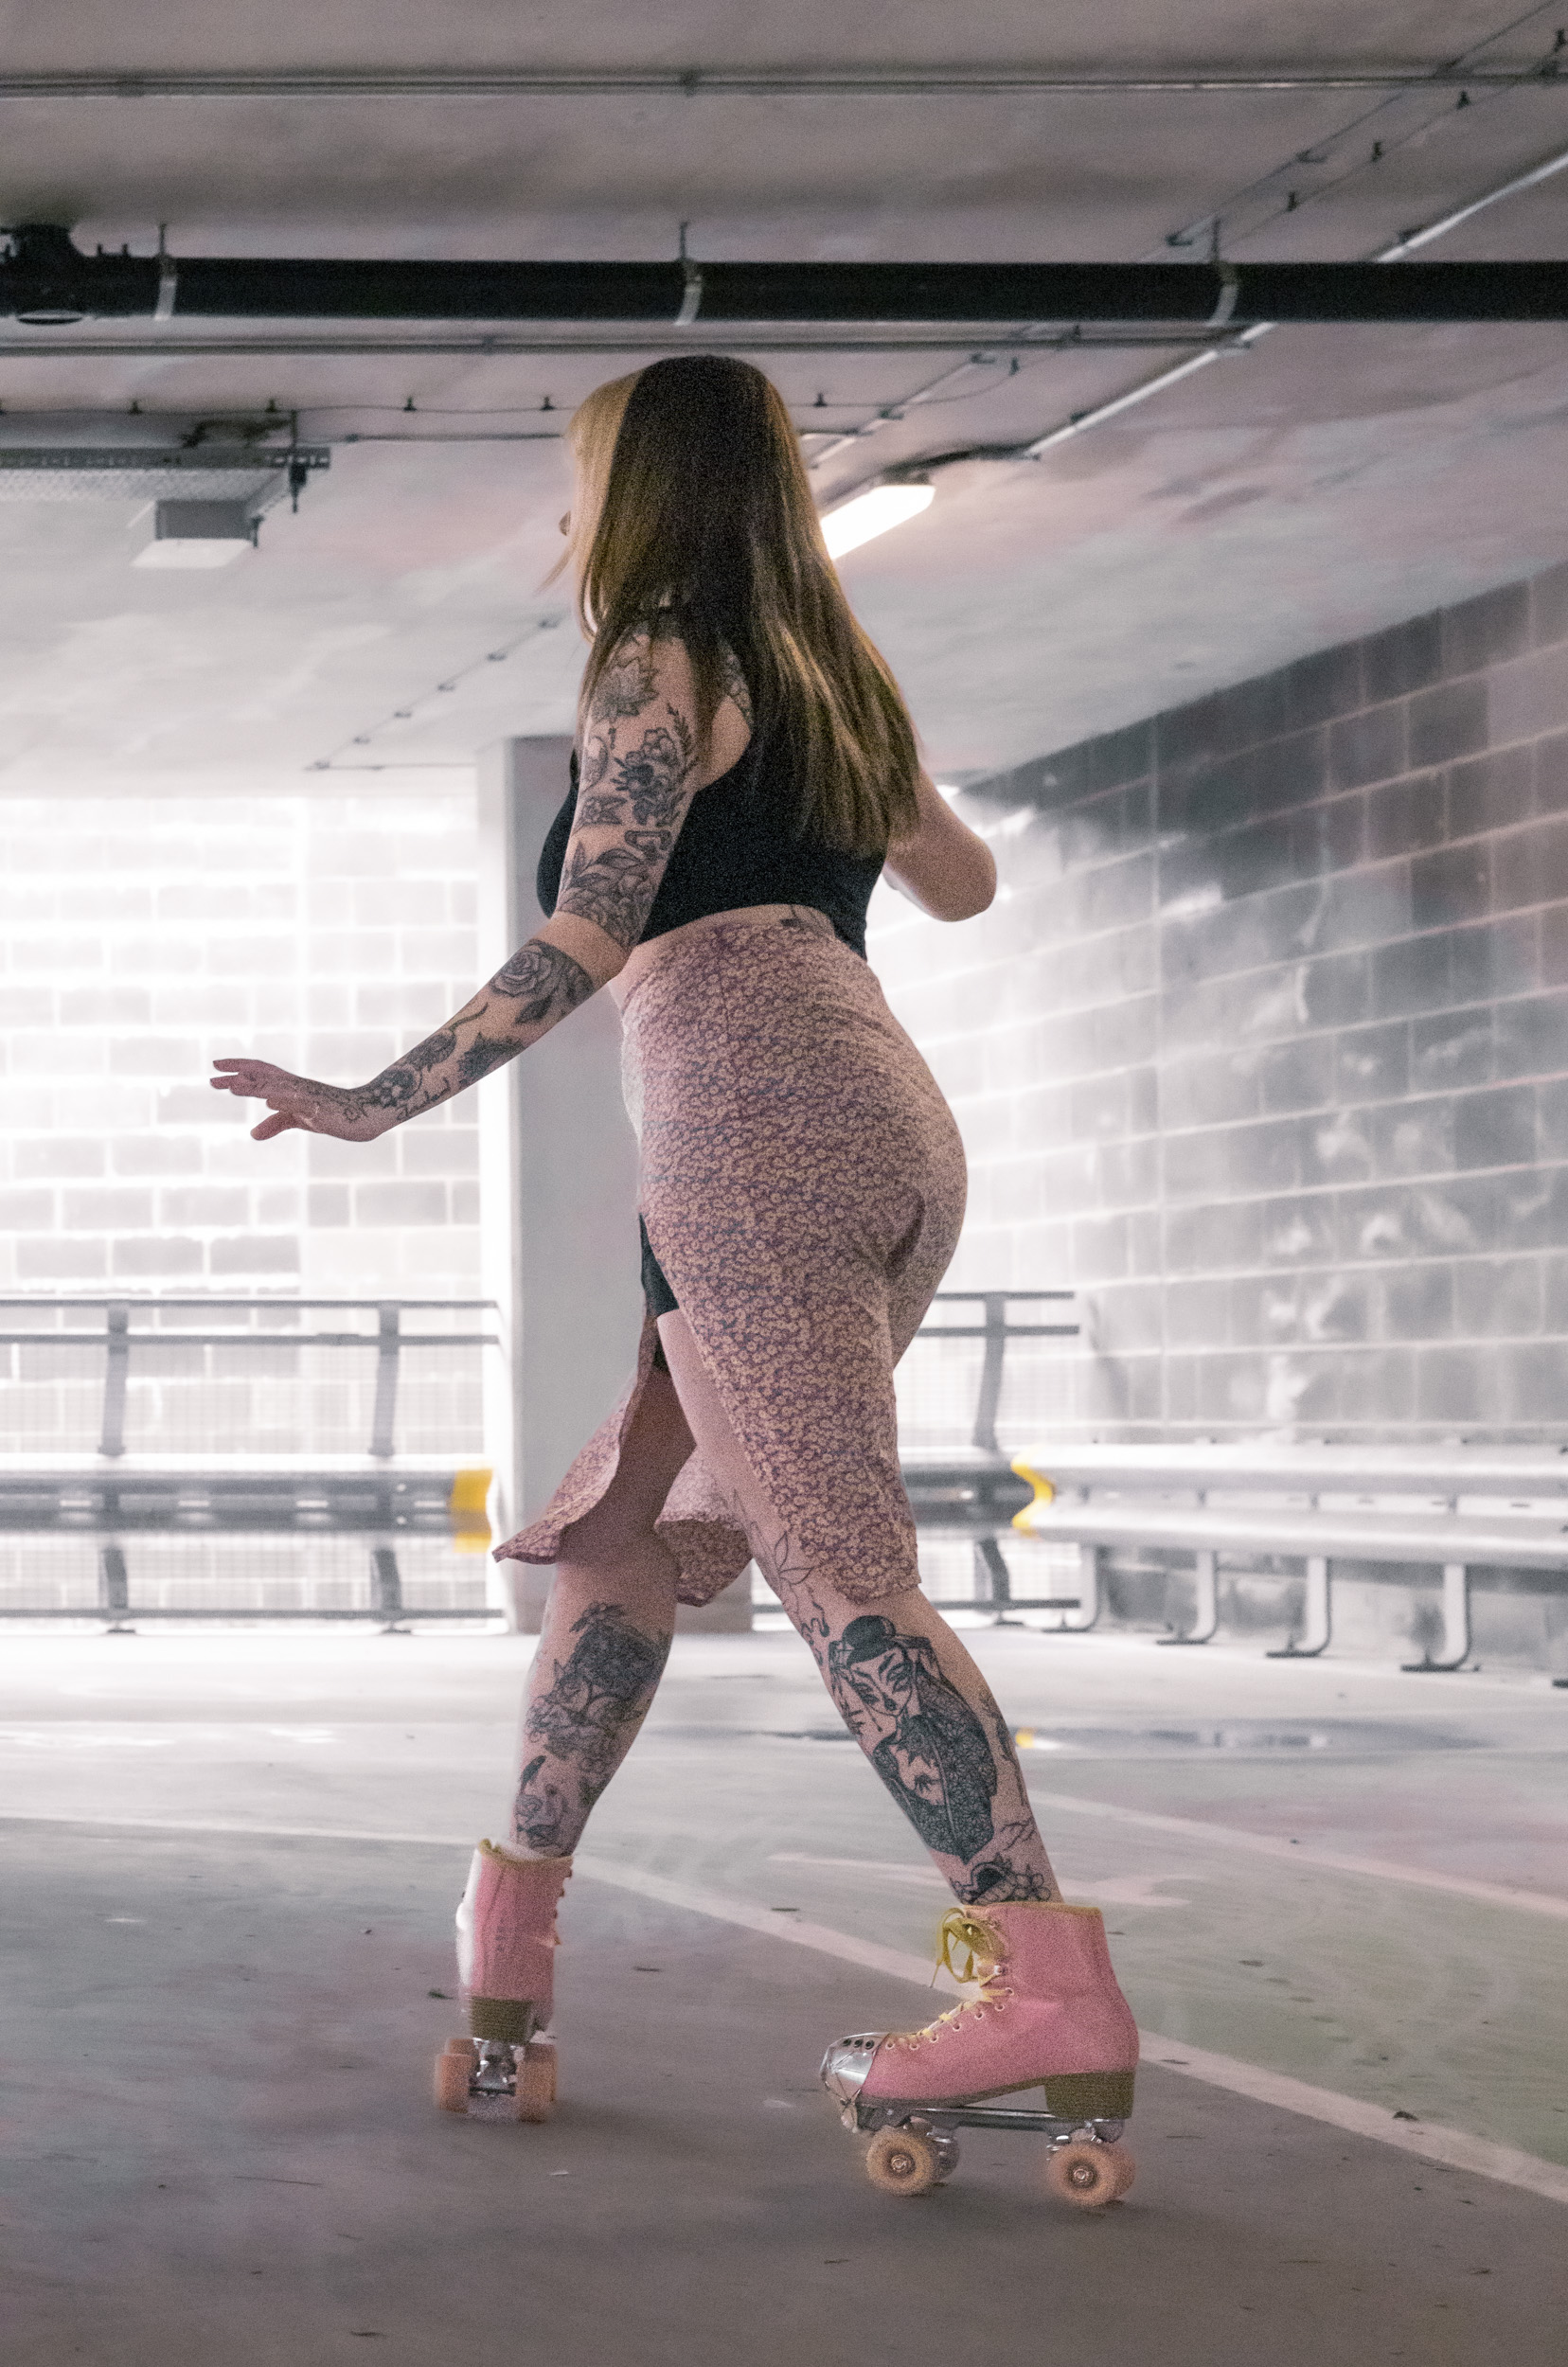 Canon EOS R8 sample image of a rollerskater in action dark lighting